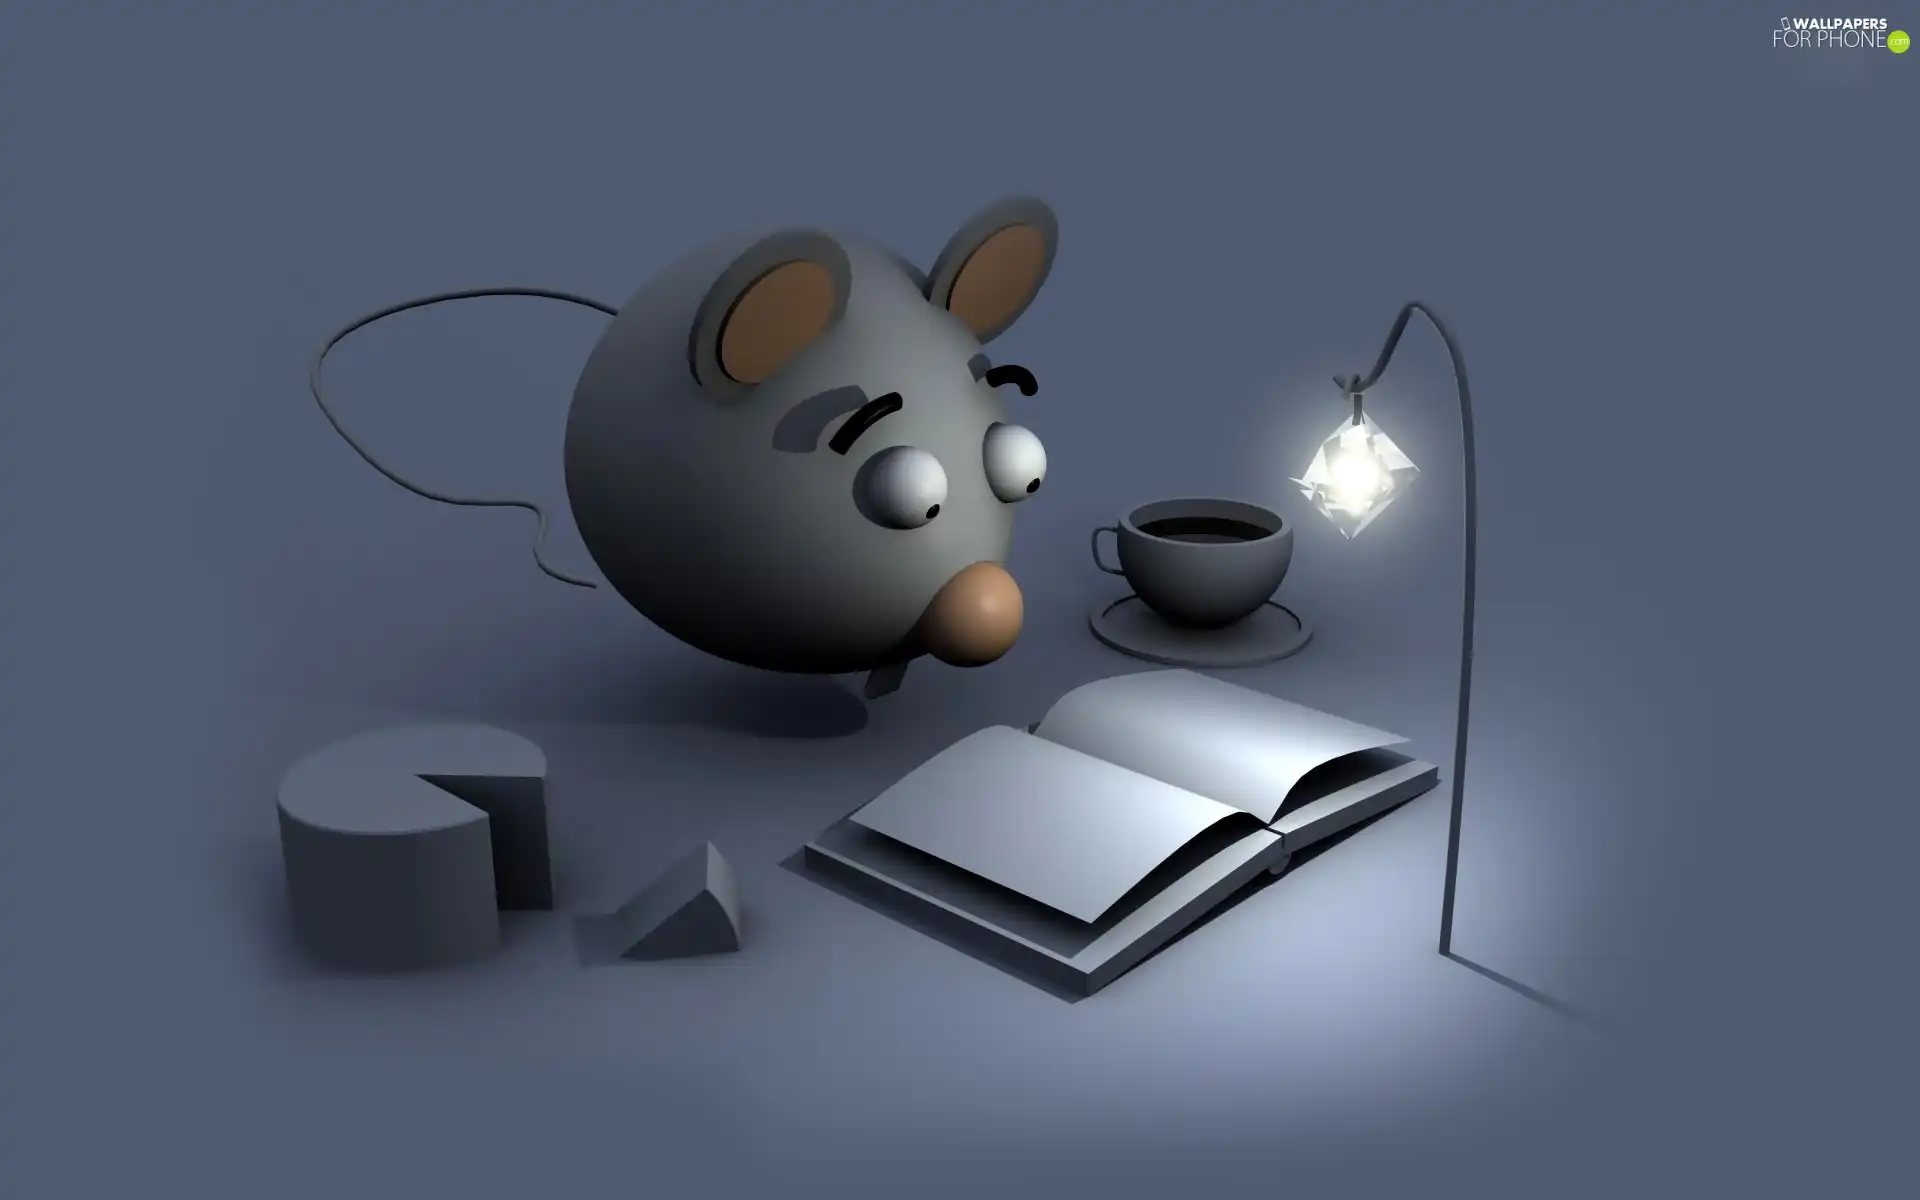 cup, wine glass, mouse, Book, 3D